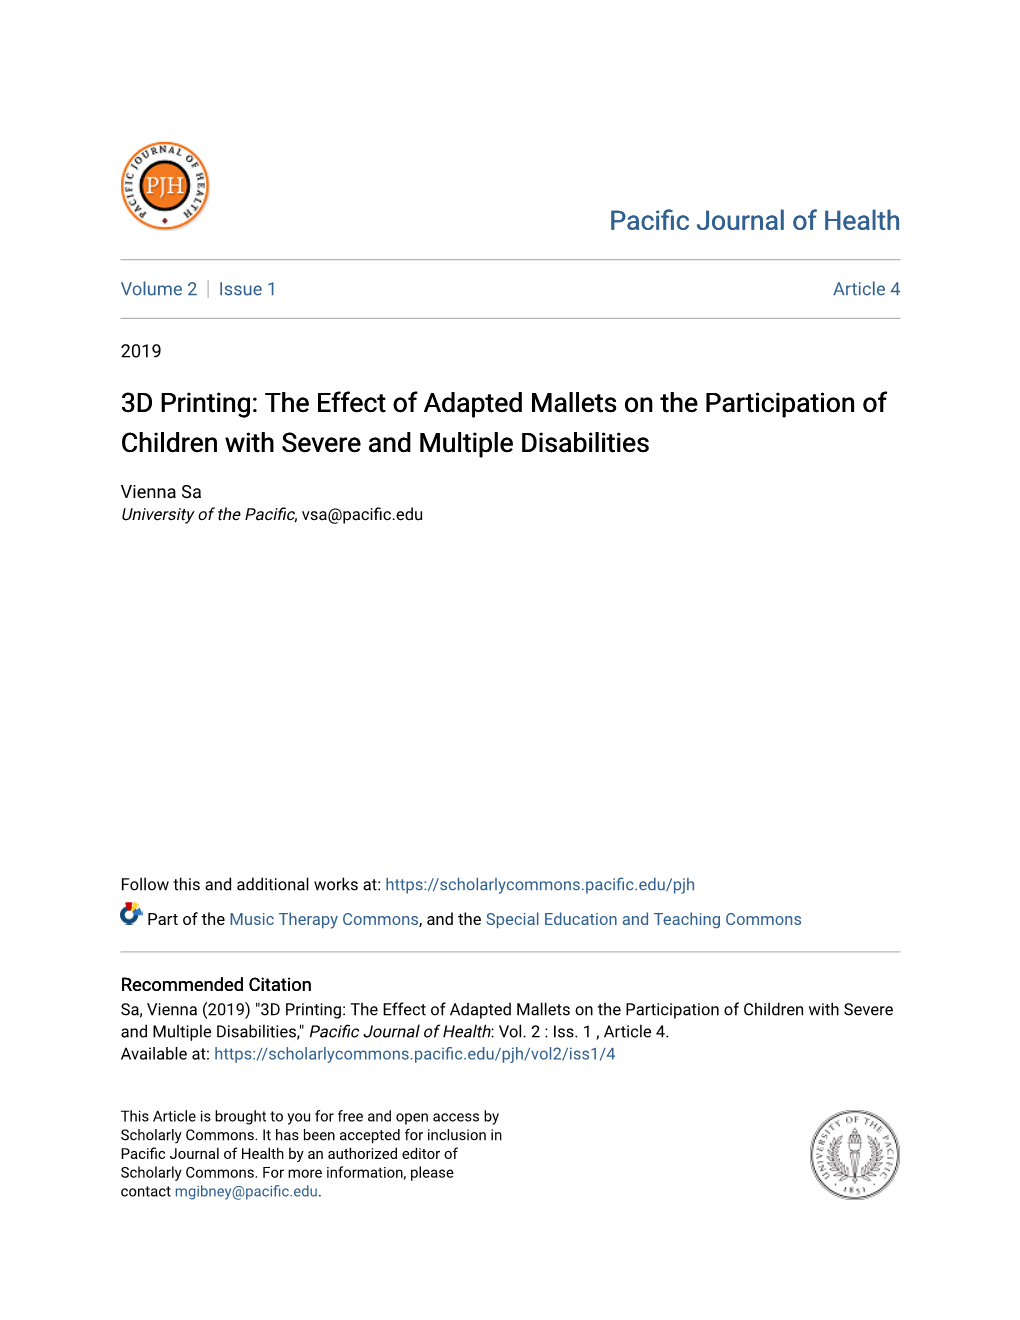 3D Printing: the Effect of Adapted Mallets on the Participation of Children with Severe and Multiple Disabilities